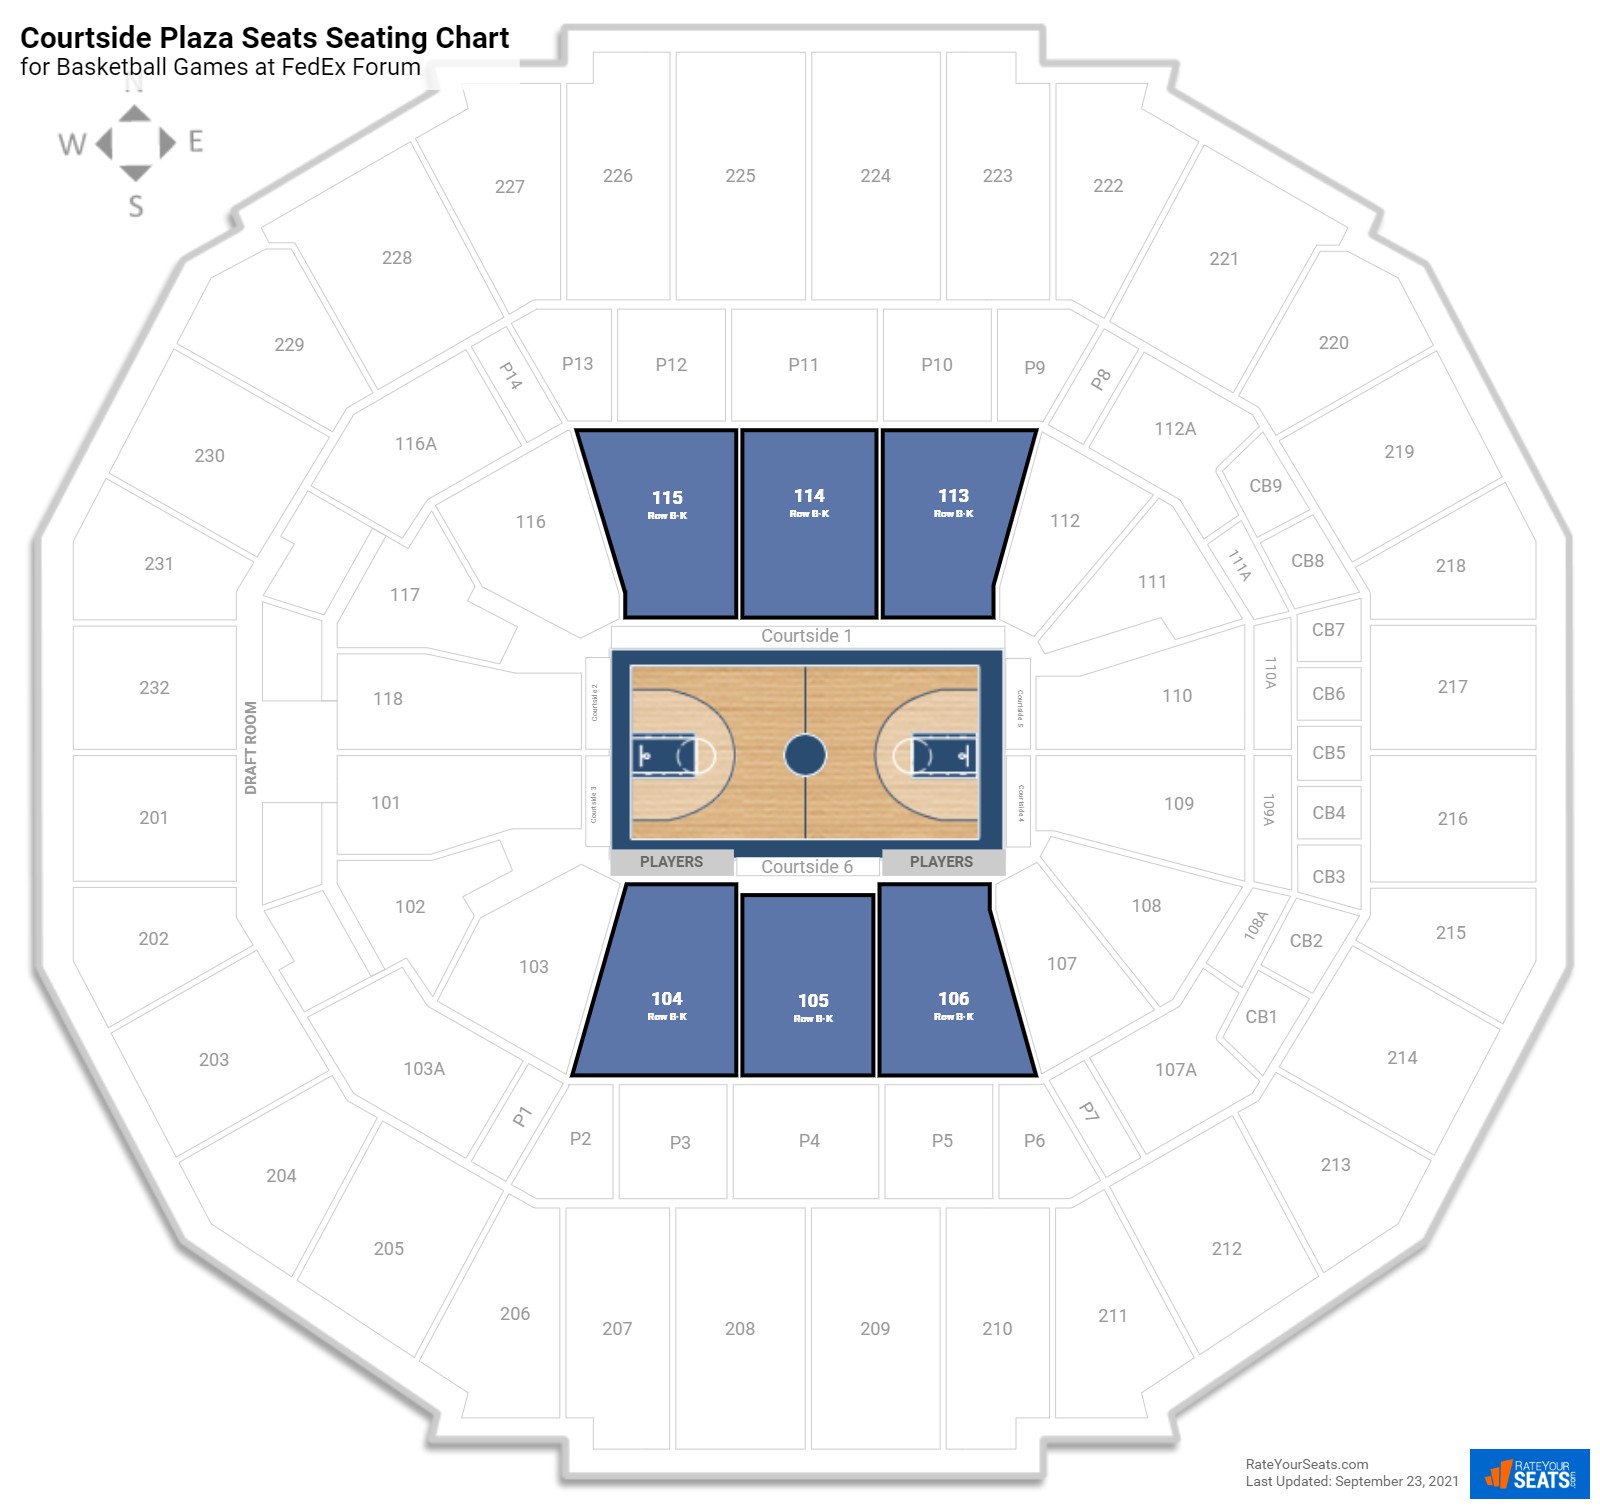 Basketball Courtside Plaza Seats Seating Chart at FedEx Forum